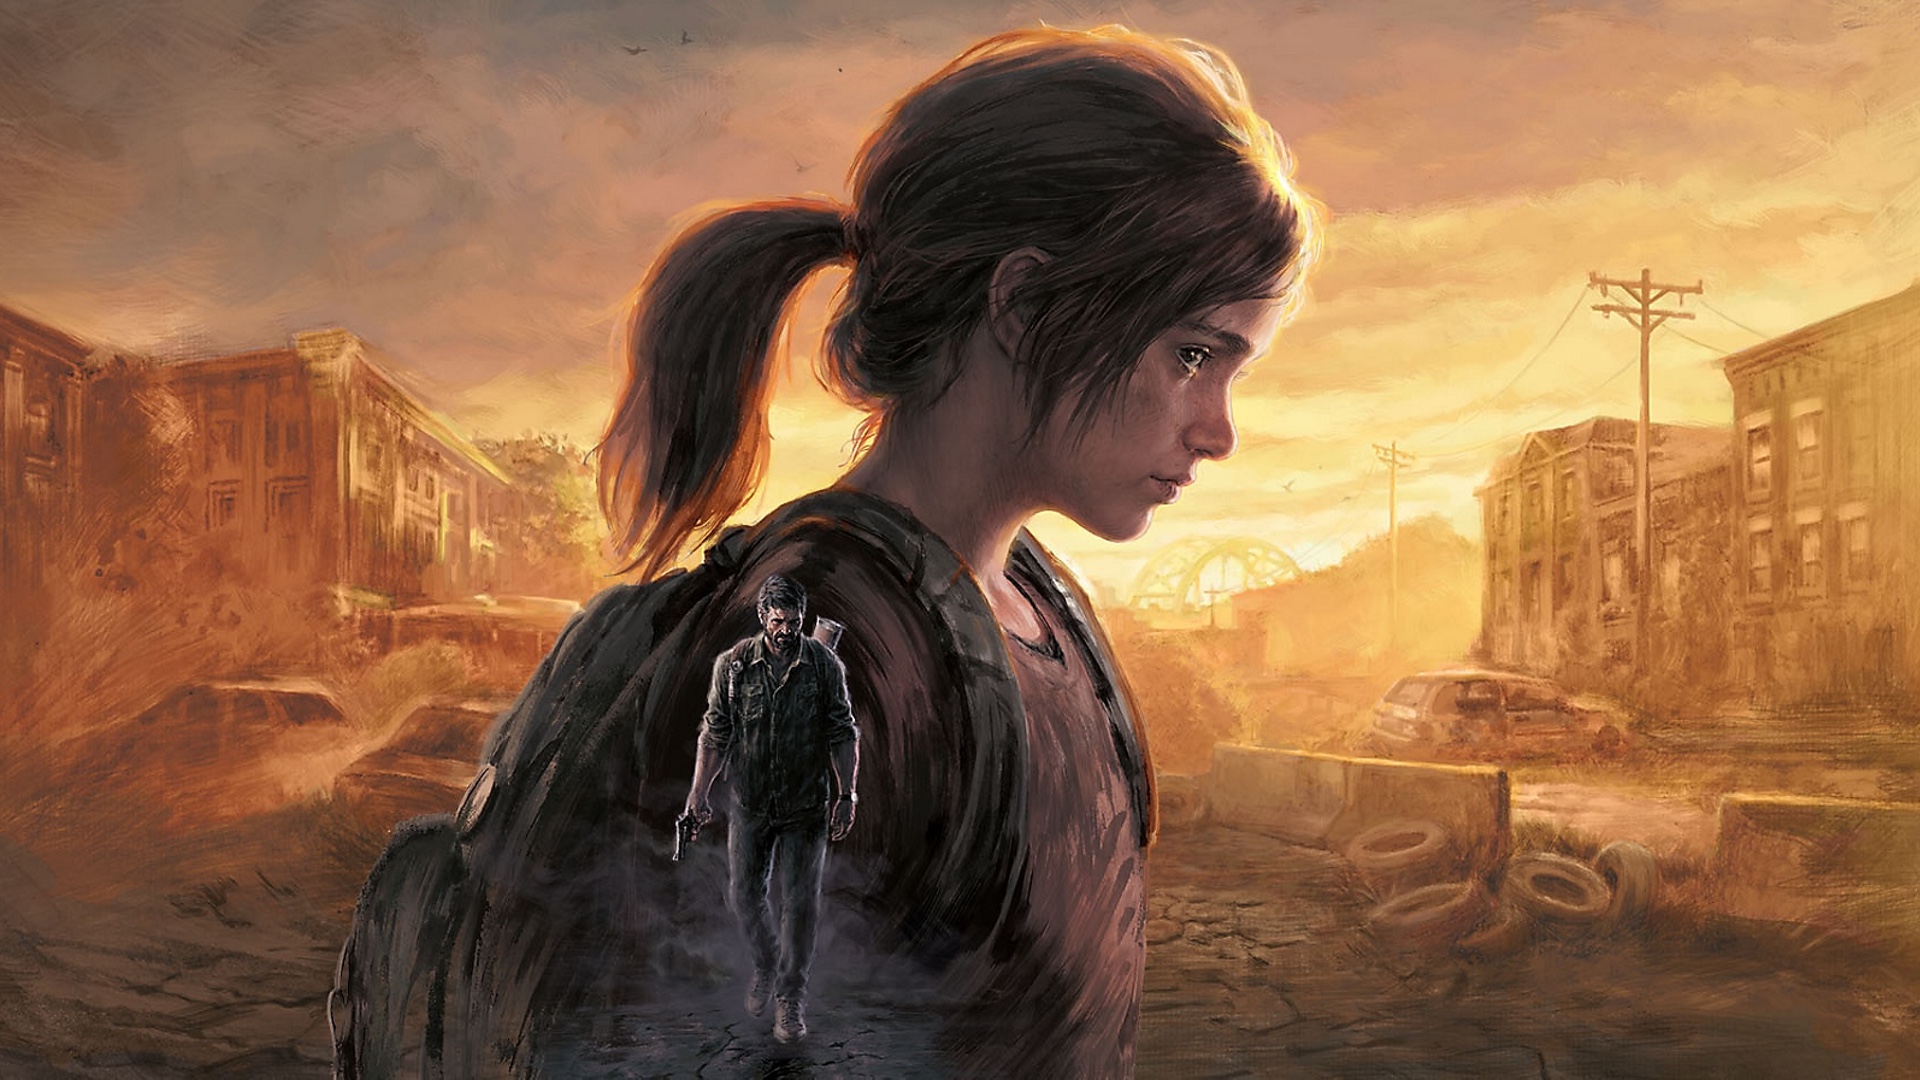 New Video Game Releases - The Last of Us Part 1